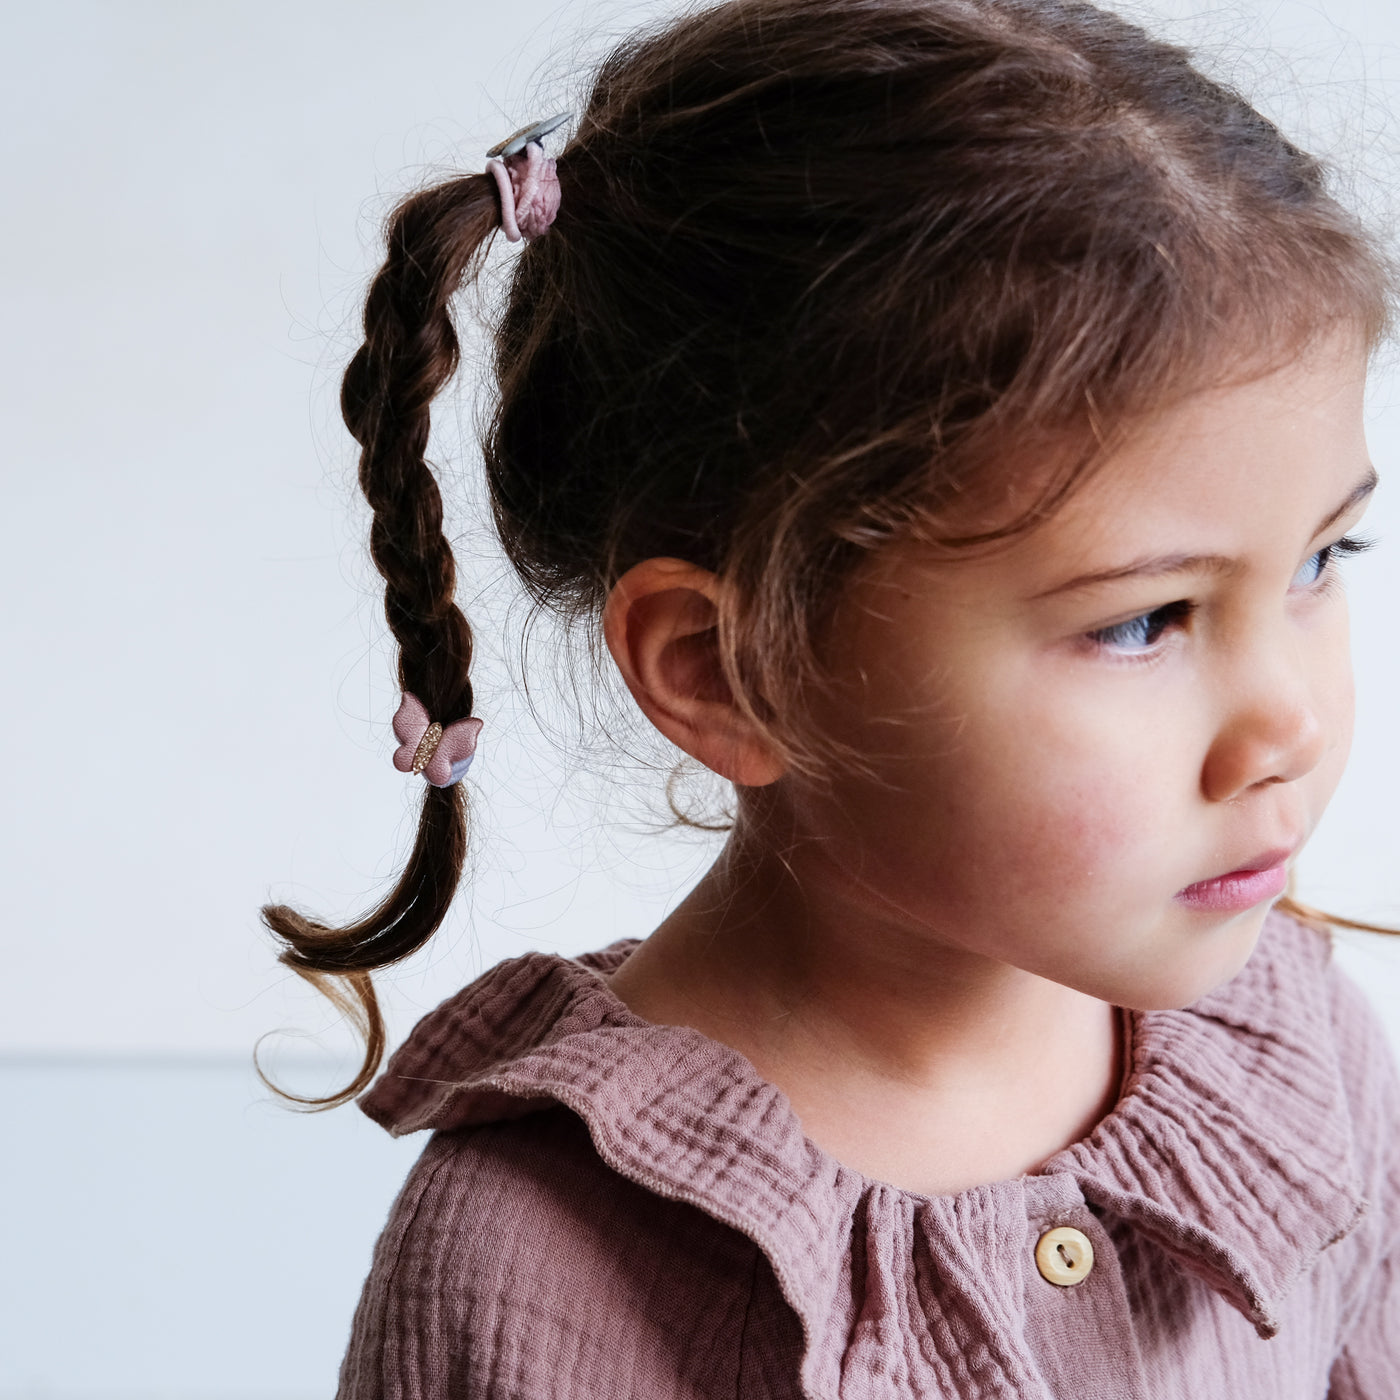 Soft metallic fabric winged butterfly pony with glitter body, worn by fine haired little girl in a high plaited pigtail hairstyle